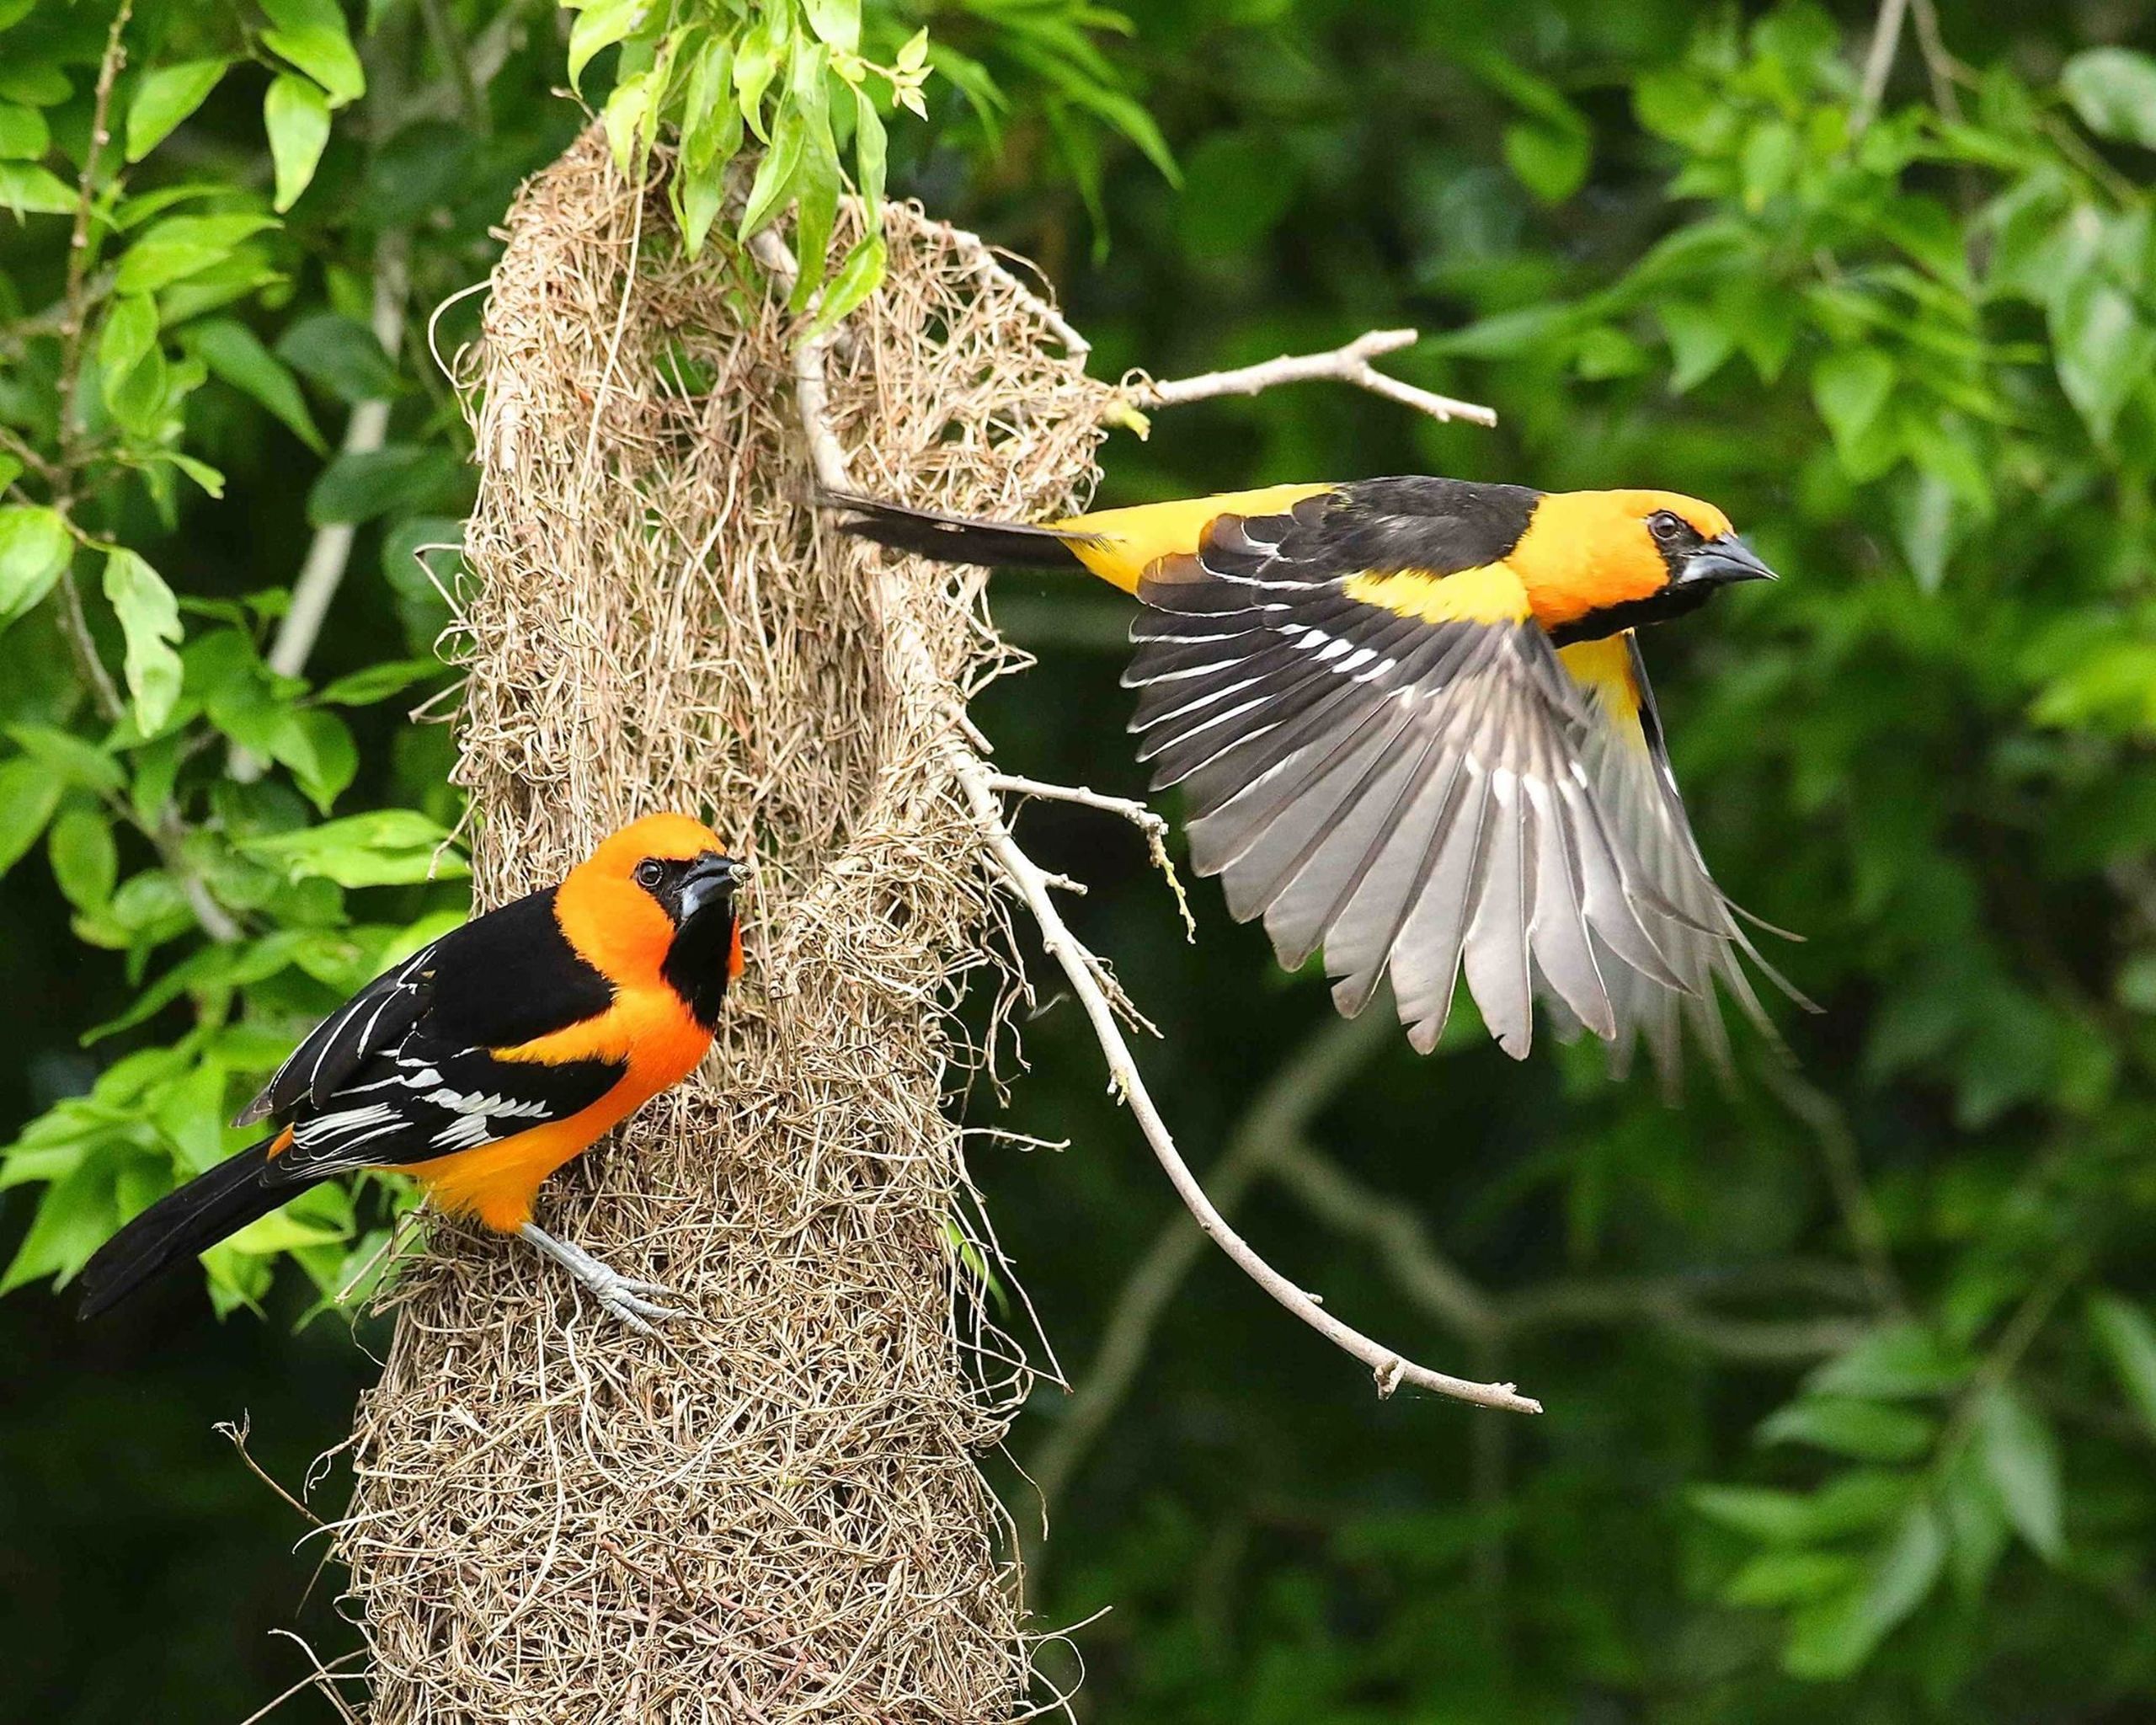 Orange and black birds called Altamira orioles at their hanging nest at Laguna Atascosa National Wildlife Refuge in south Texas.